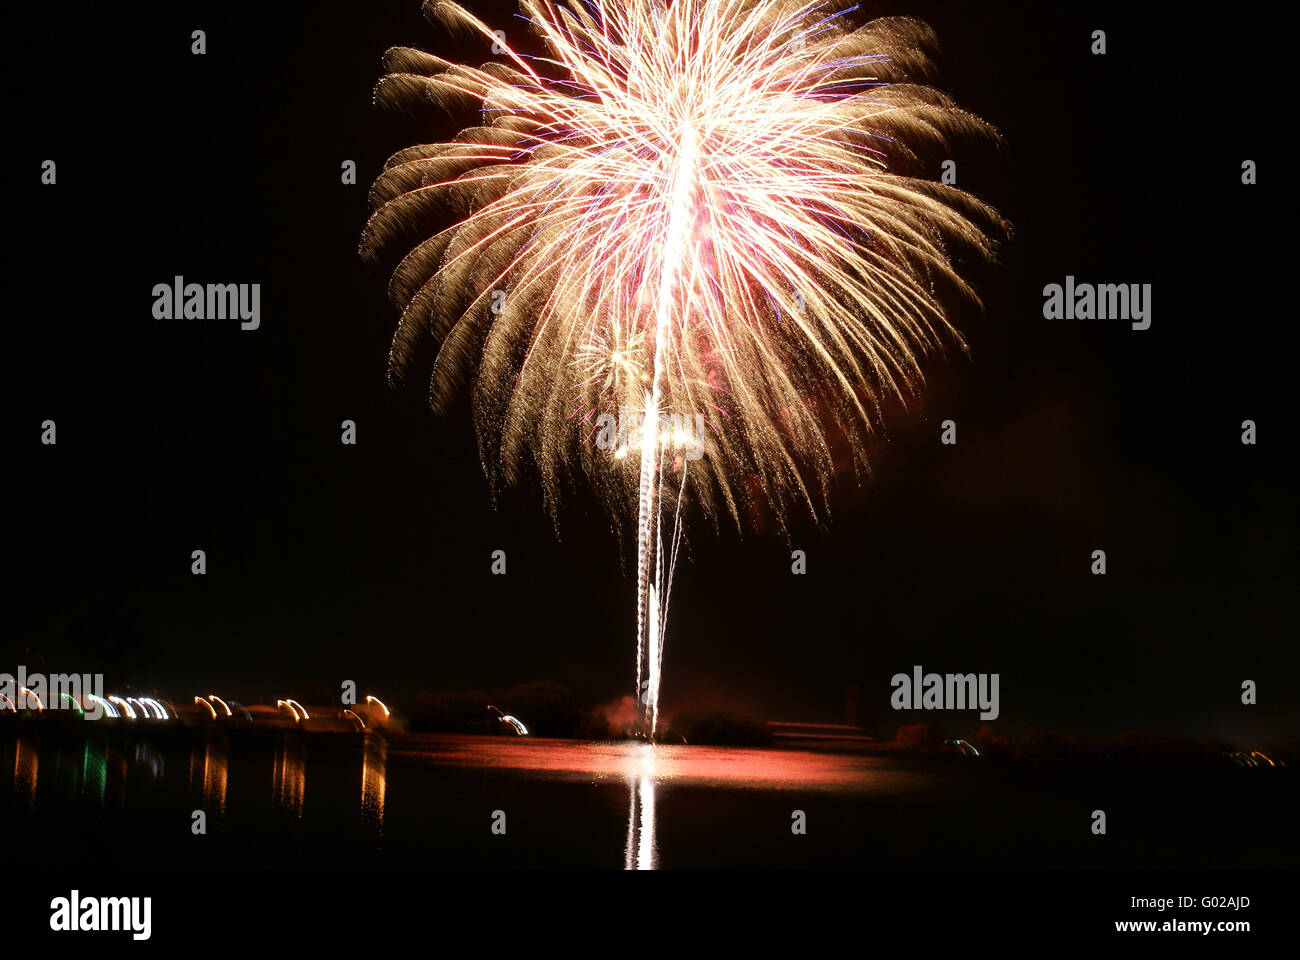 Lake Siskiyou Fireworks, held every year on night of 4th of July